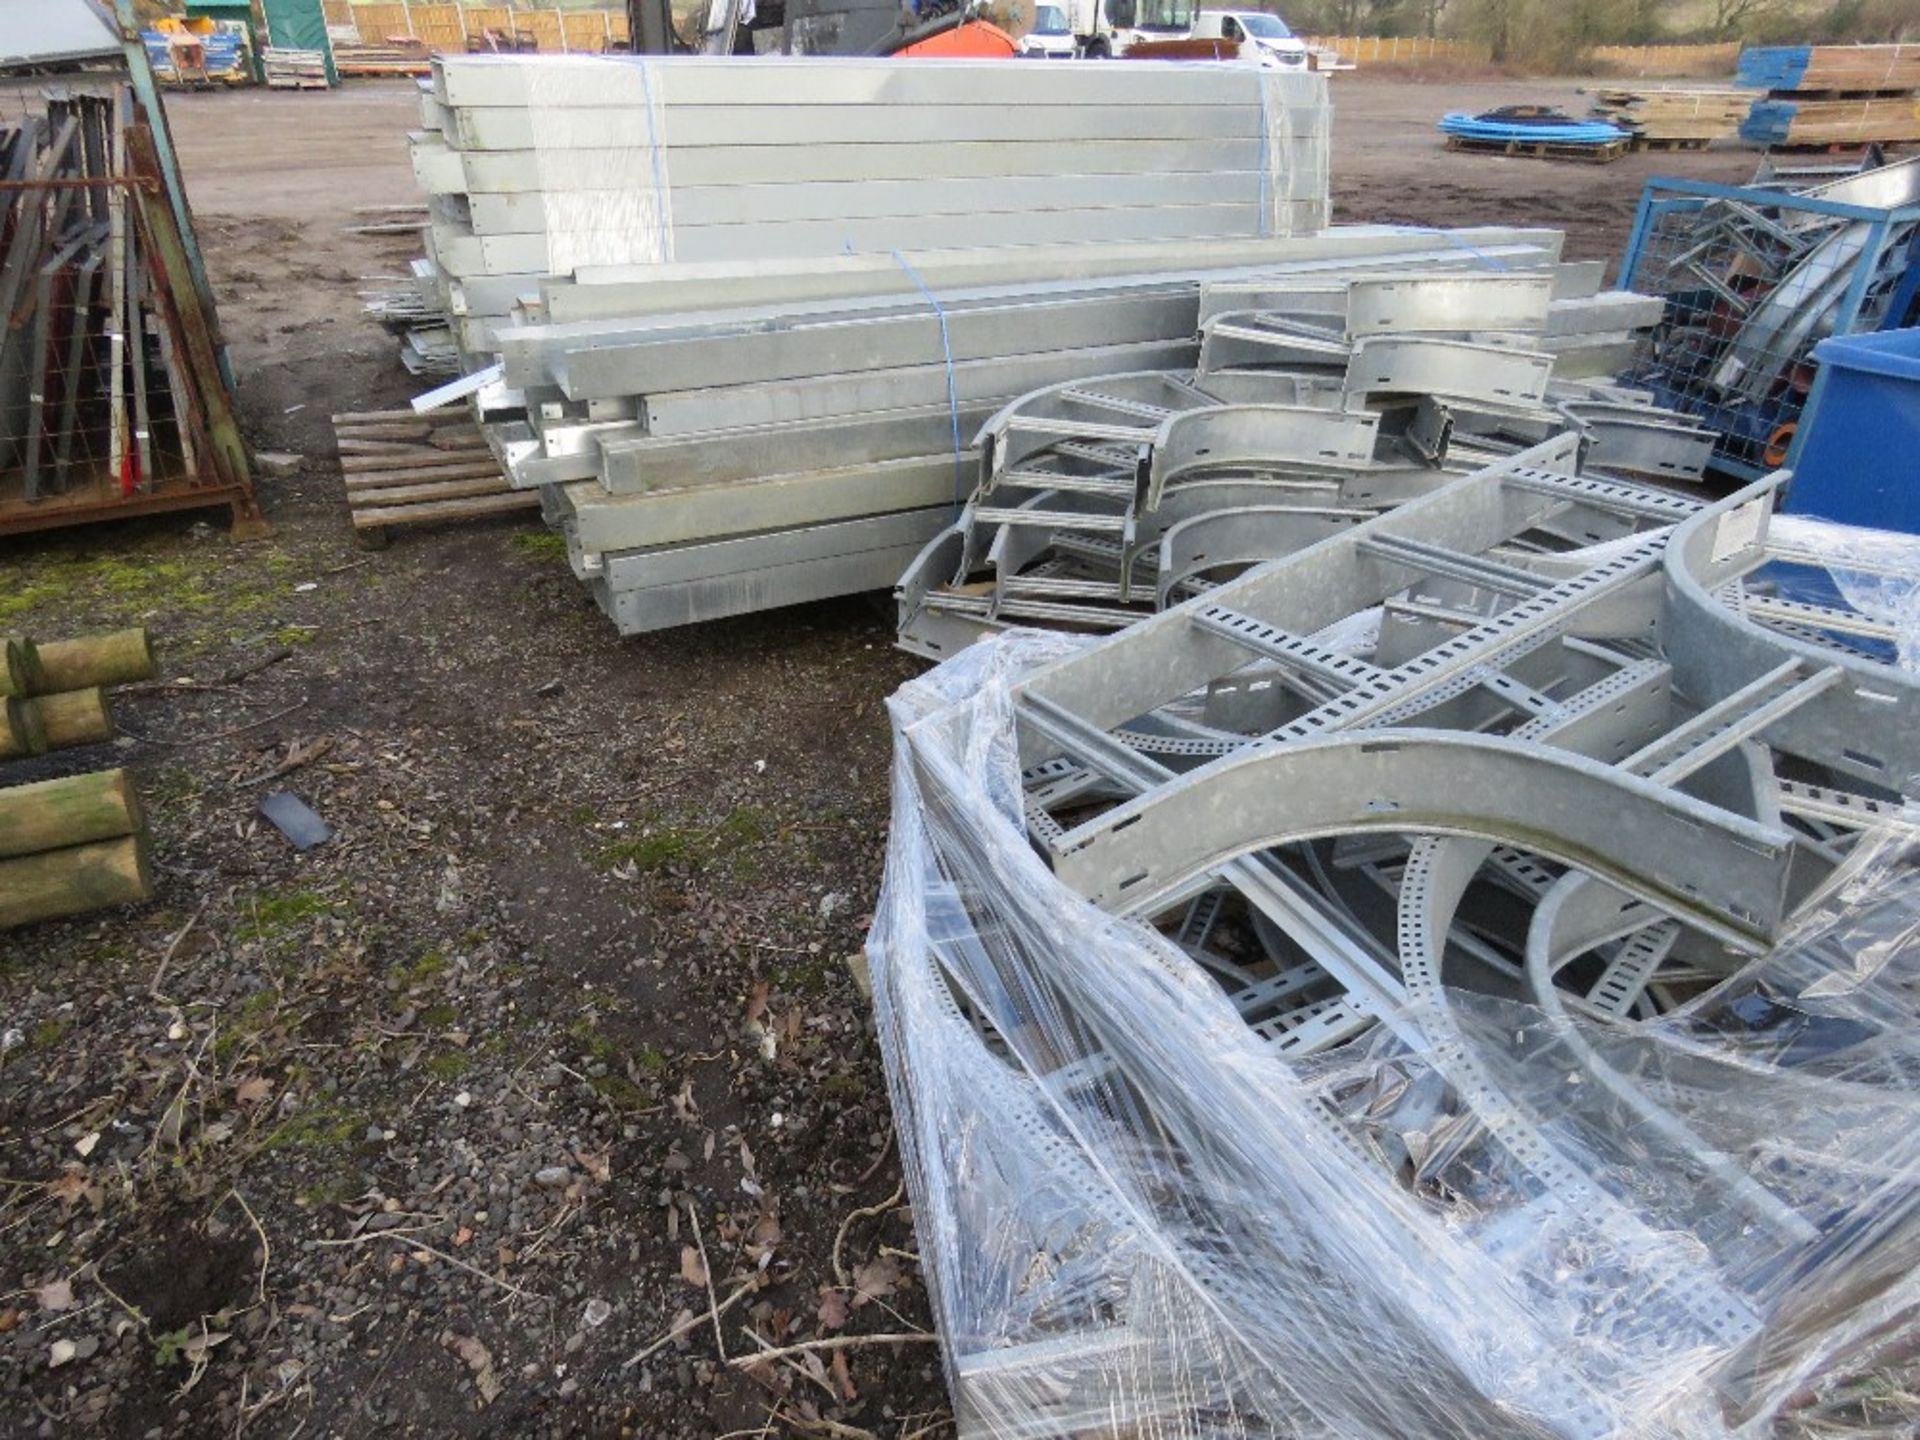 LARGE QUANTITY OF METAL DUCTING PARTS INCLUDING DUCTS AT 9FT LENGTH APPROX. SOURCED FROM COMPANY LIQ - Bild 6 aus 9